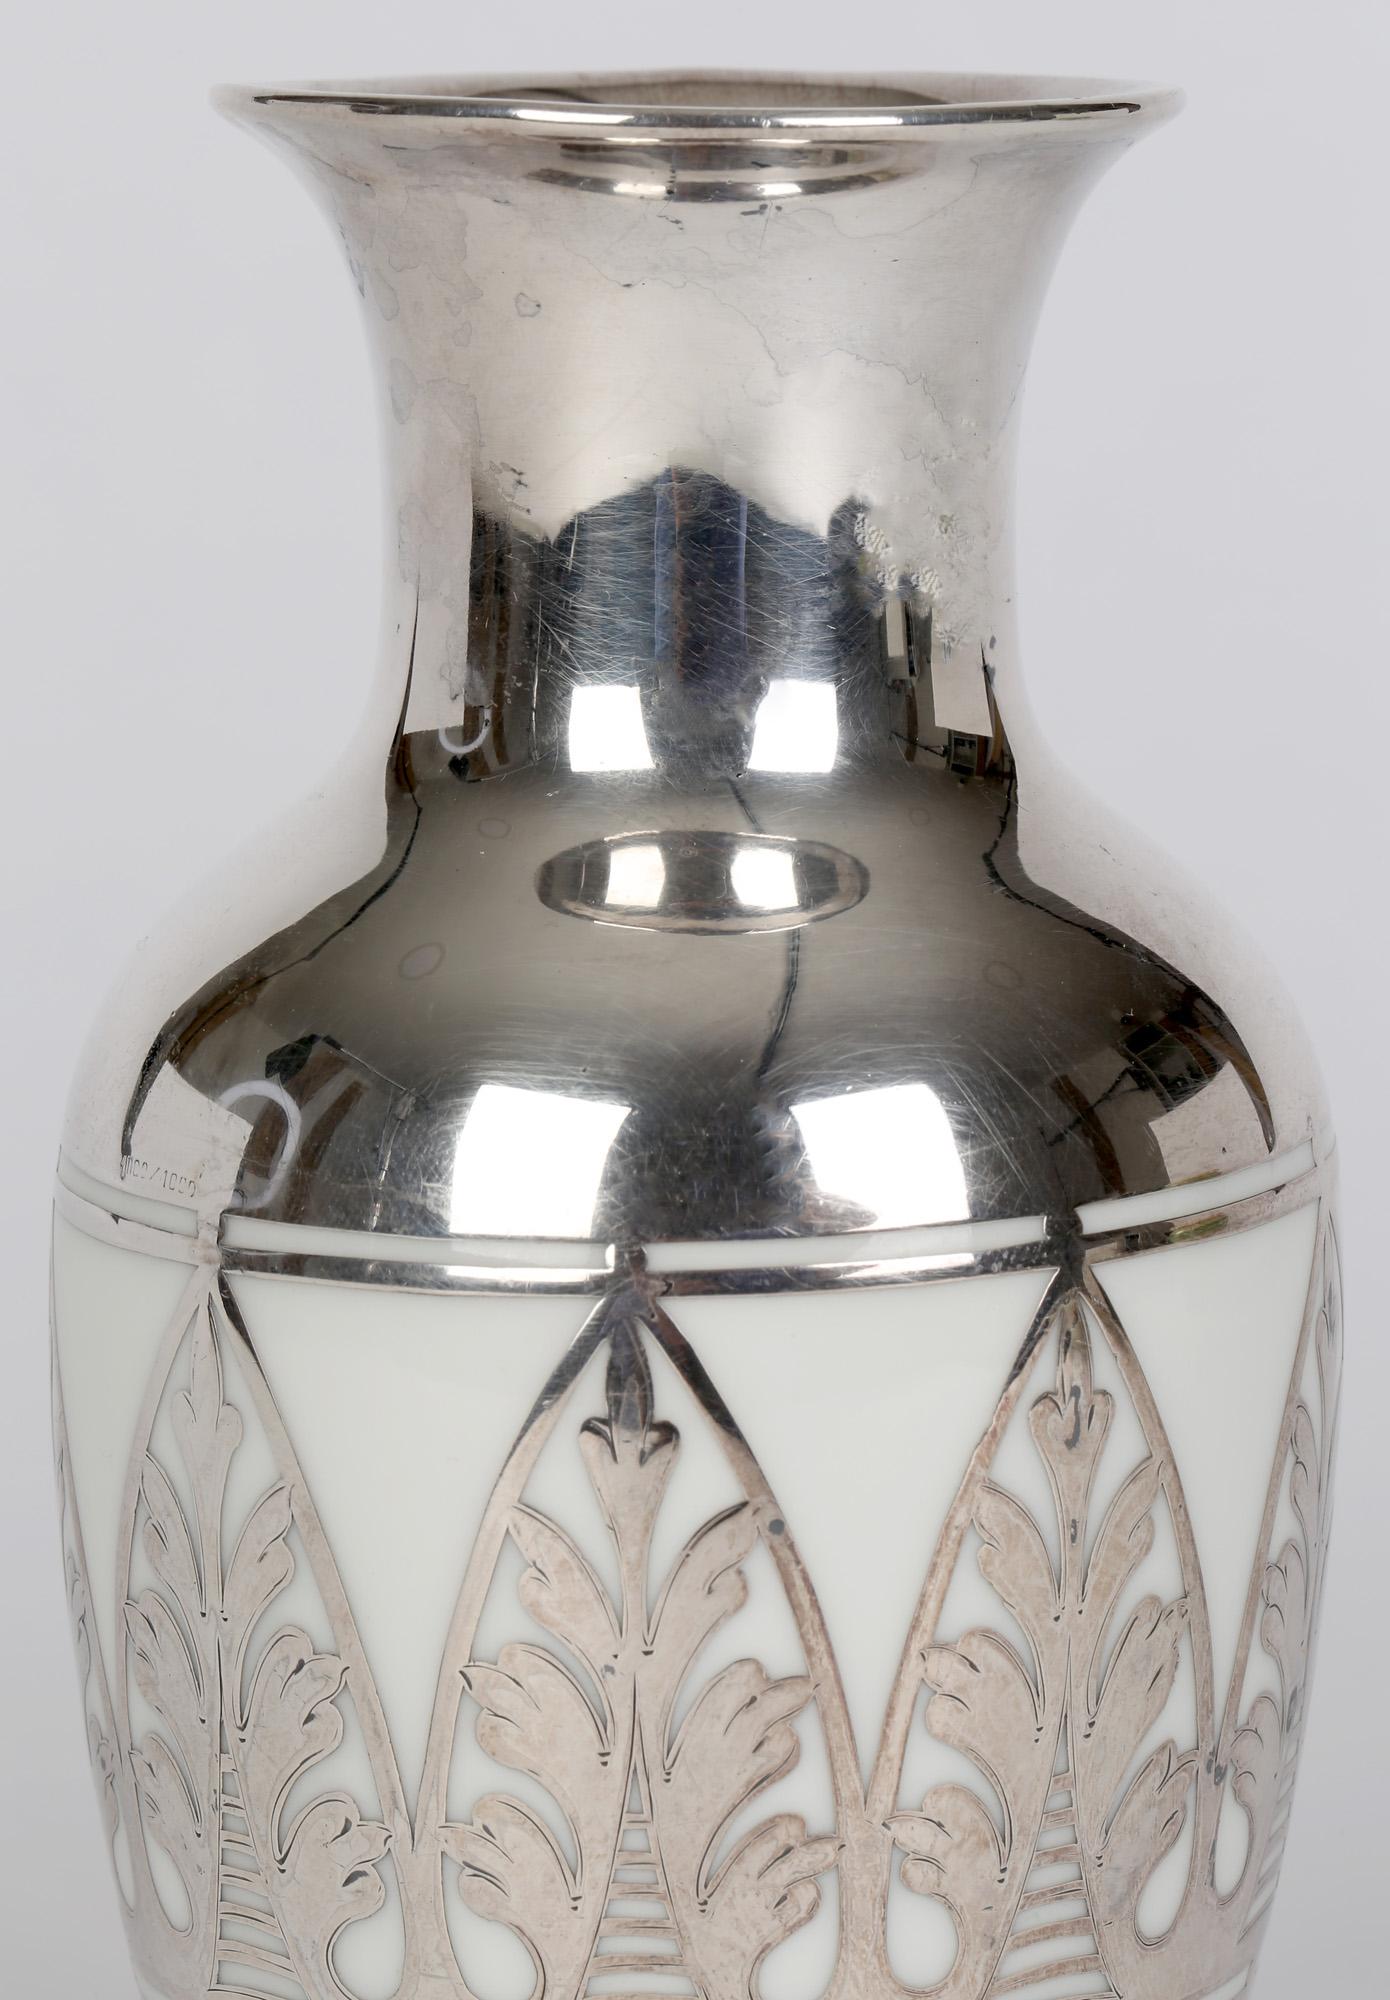 A finely made Art Deco German Bavarian porcelain vase with silver overlay by Thomas and dating from around 1930. The vase of bulbous shape stands on a narrow rounded foot with a funnel shaped neck and trumpet shaped top. The vase made in white